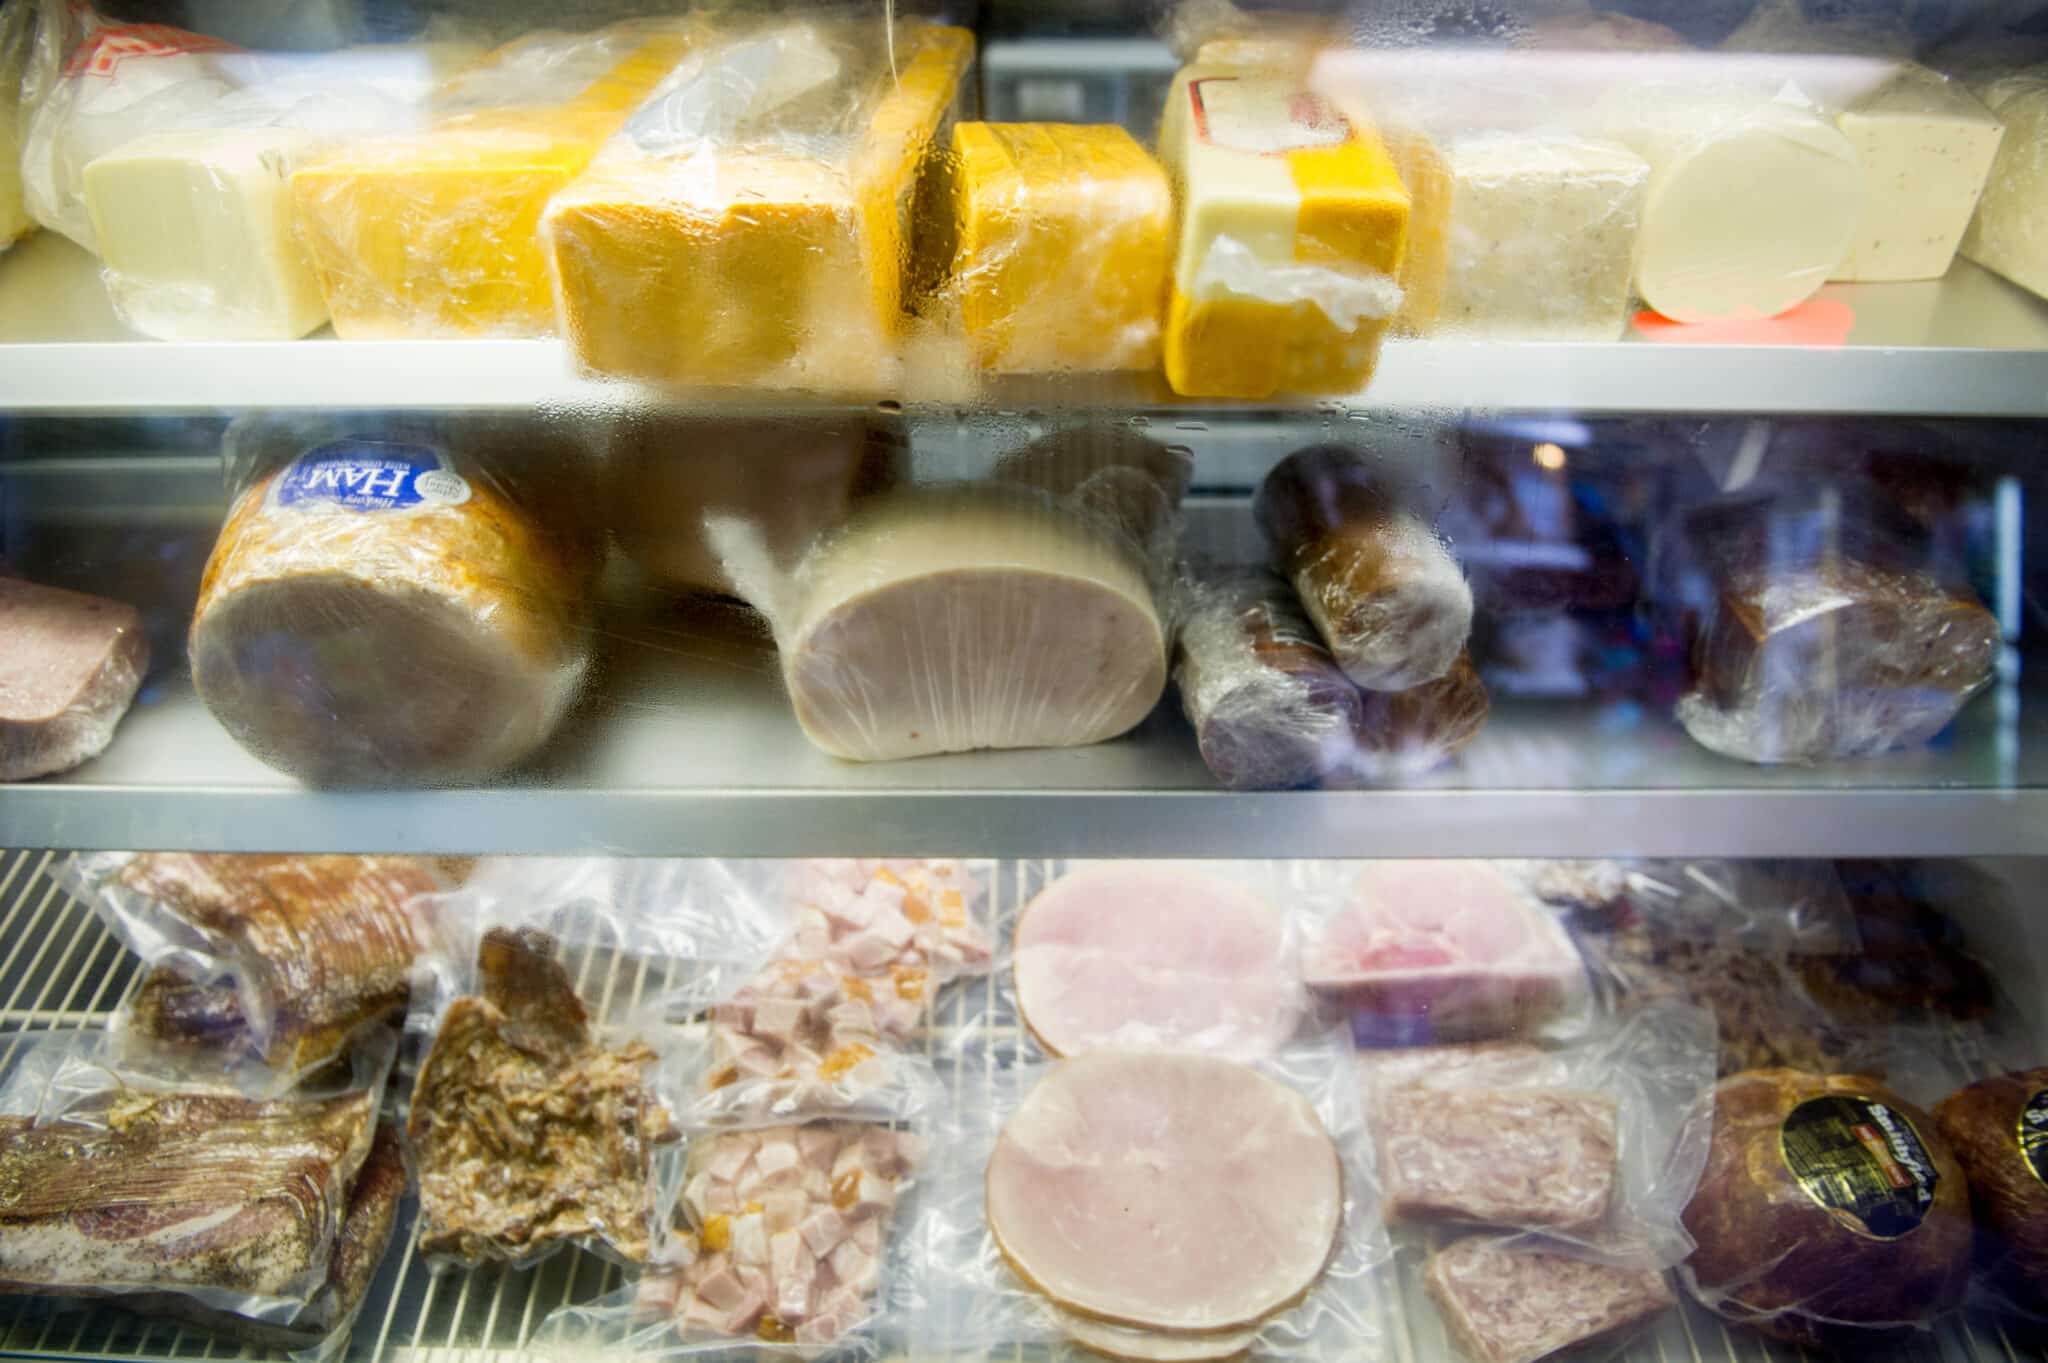 Deli case of cheese and meats in Frostburg, MD. (Photo by: Edwin Remsburg/VW Pics via Getty Images)